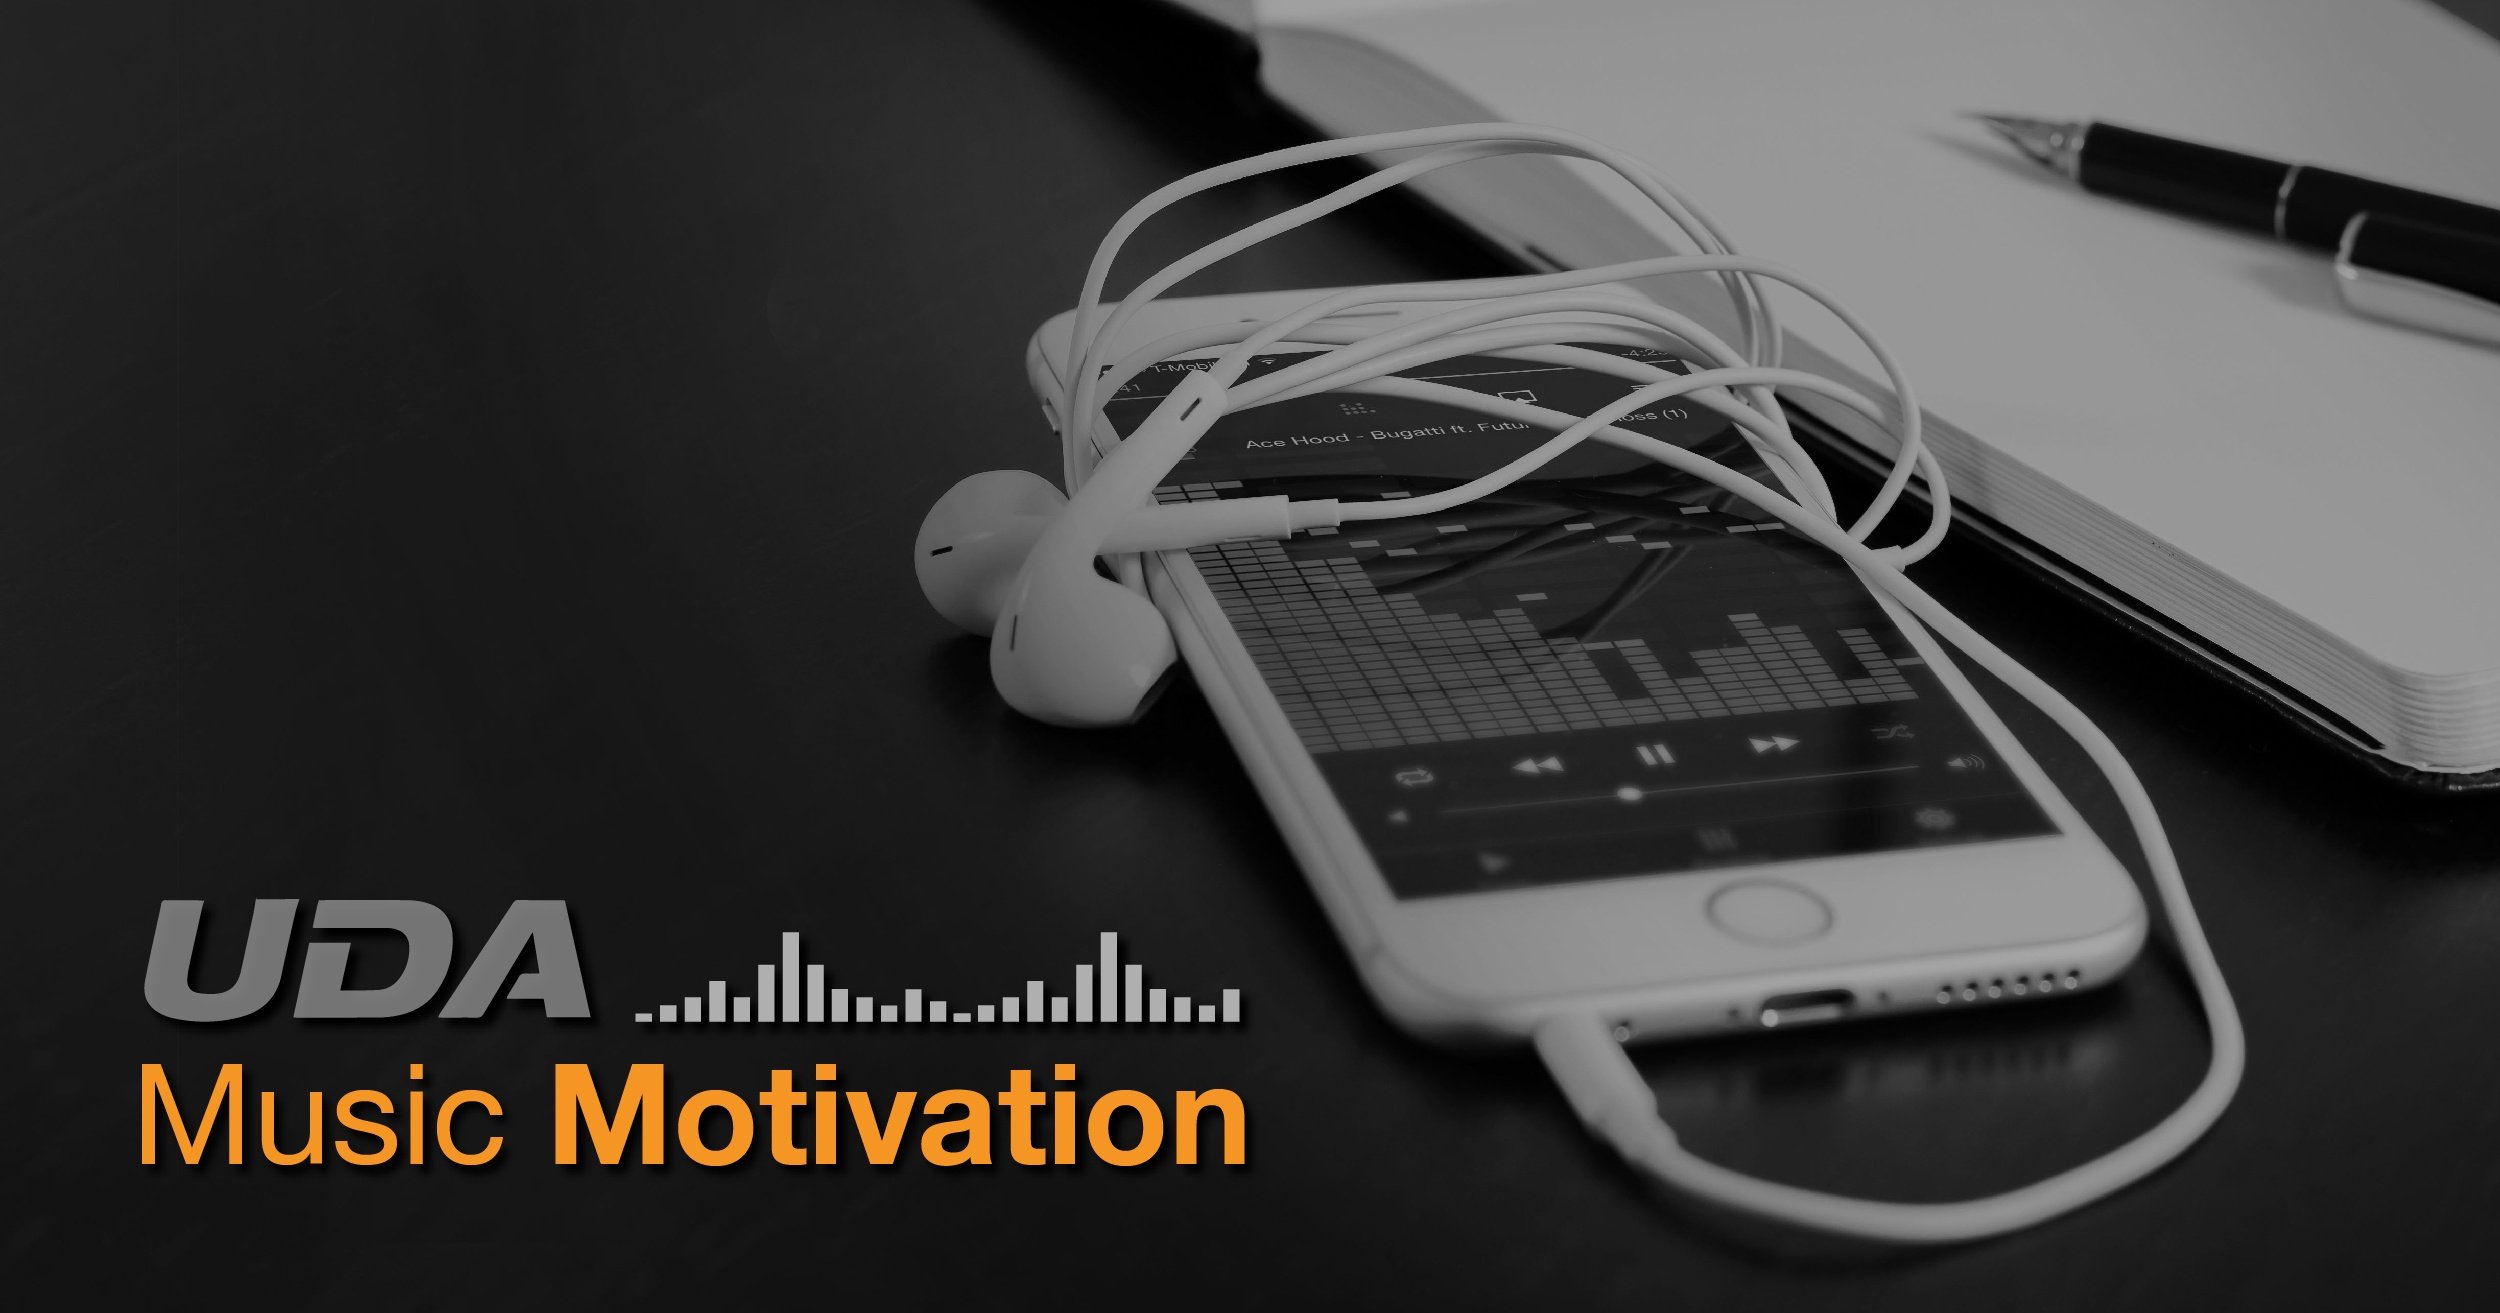 Music Motivation: Less Words, More Work